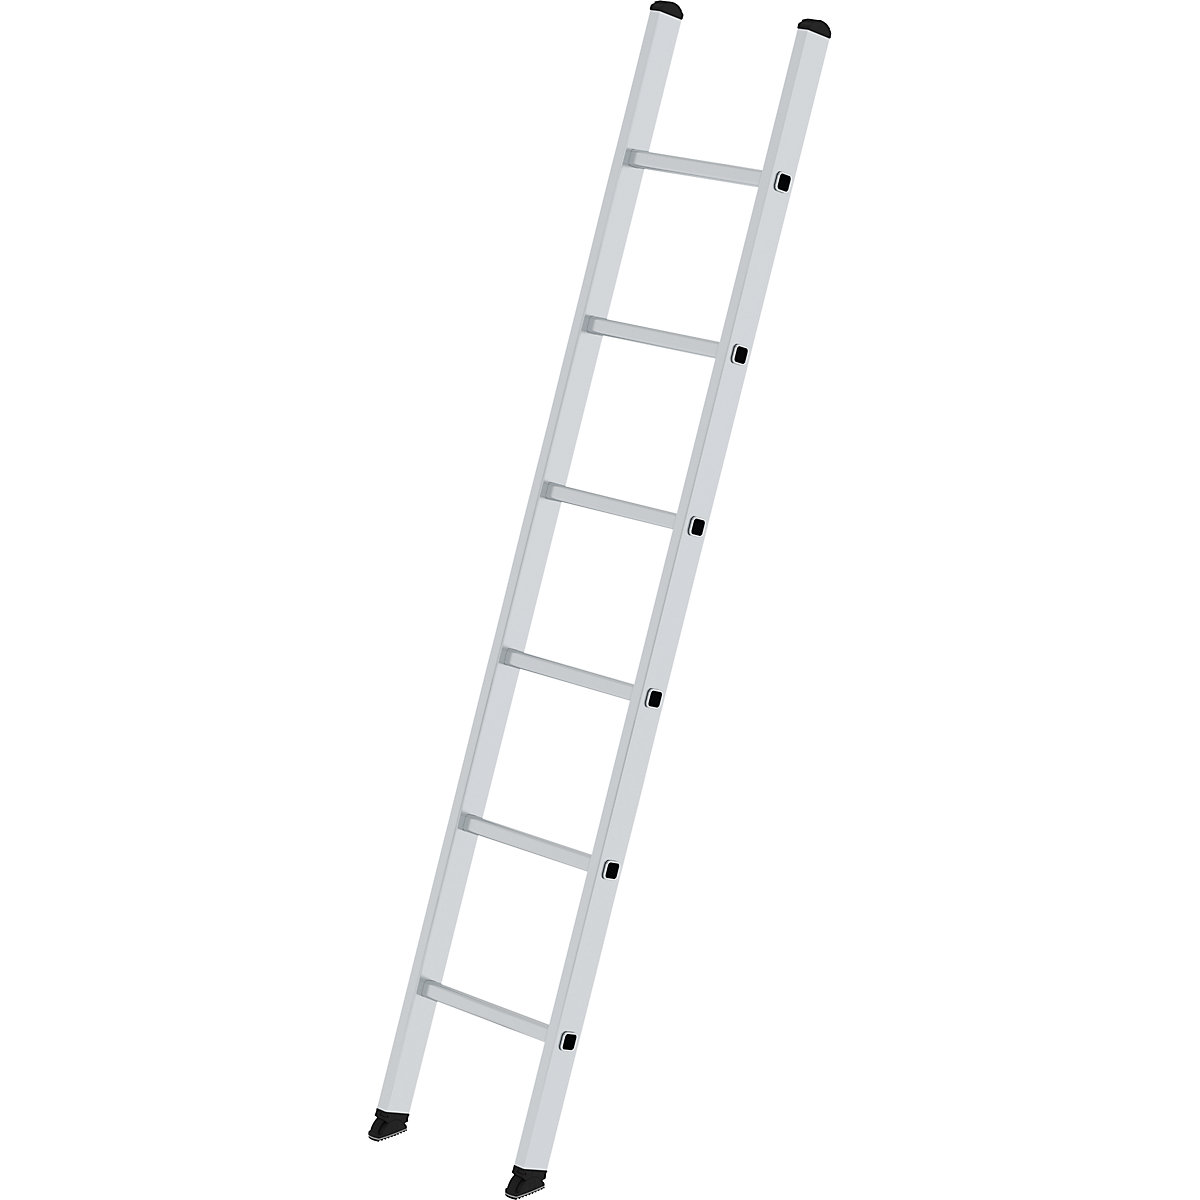 Lean-to rung ladder without beam – MUNK